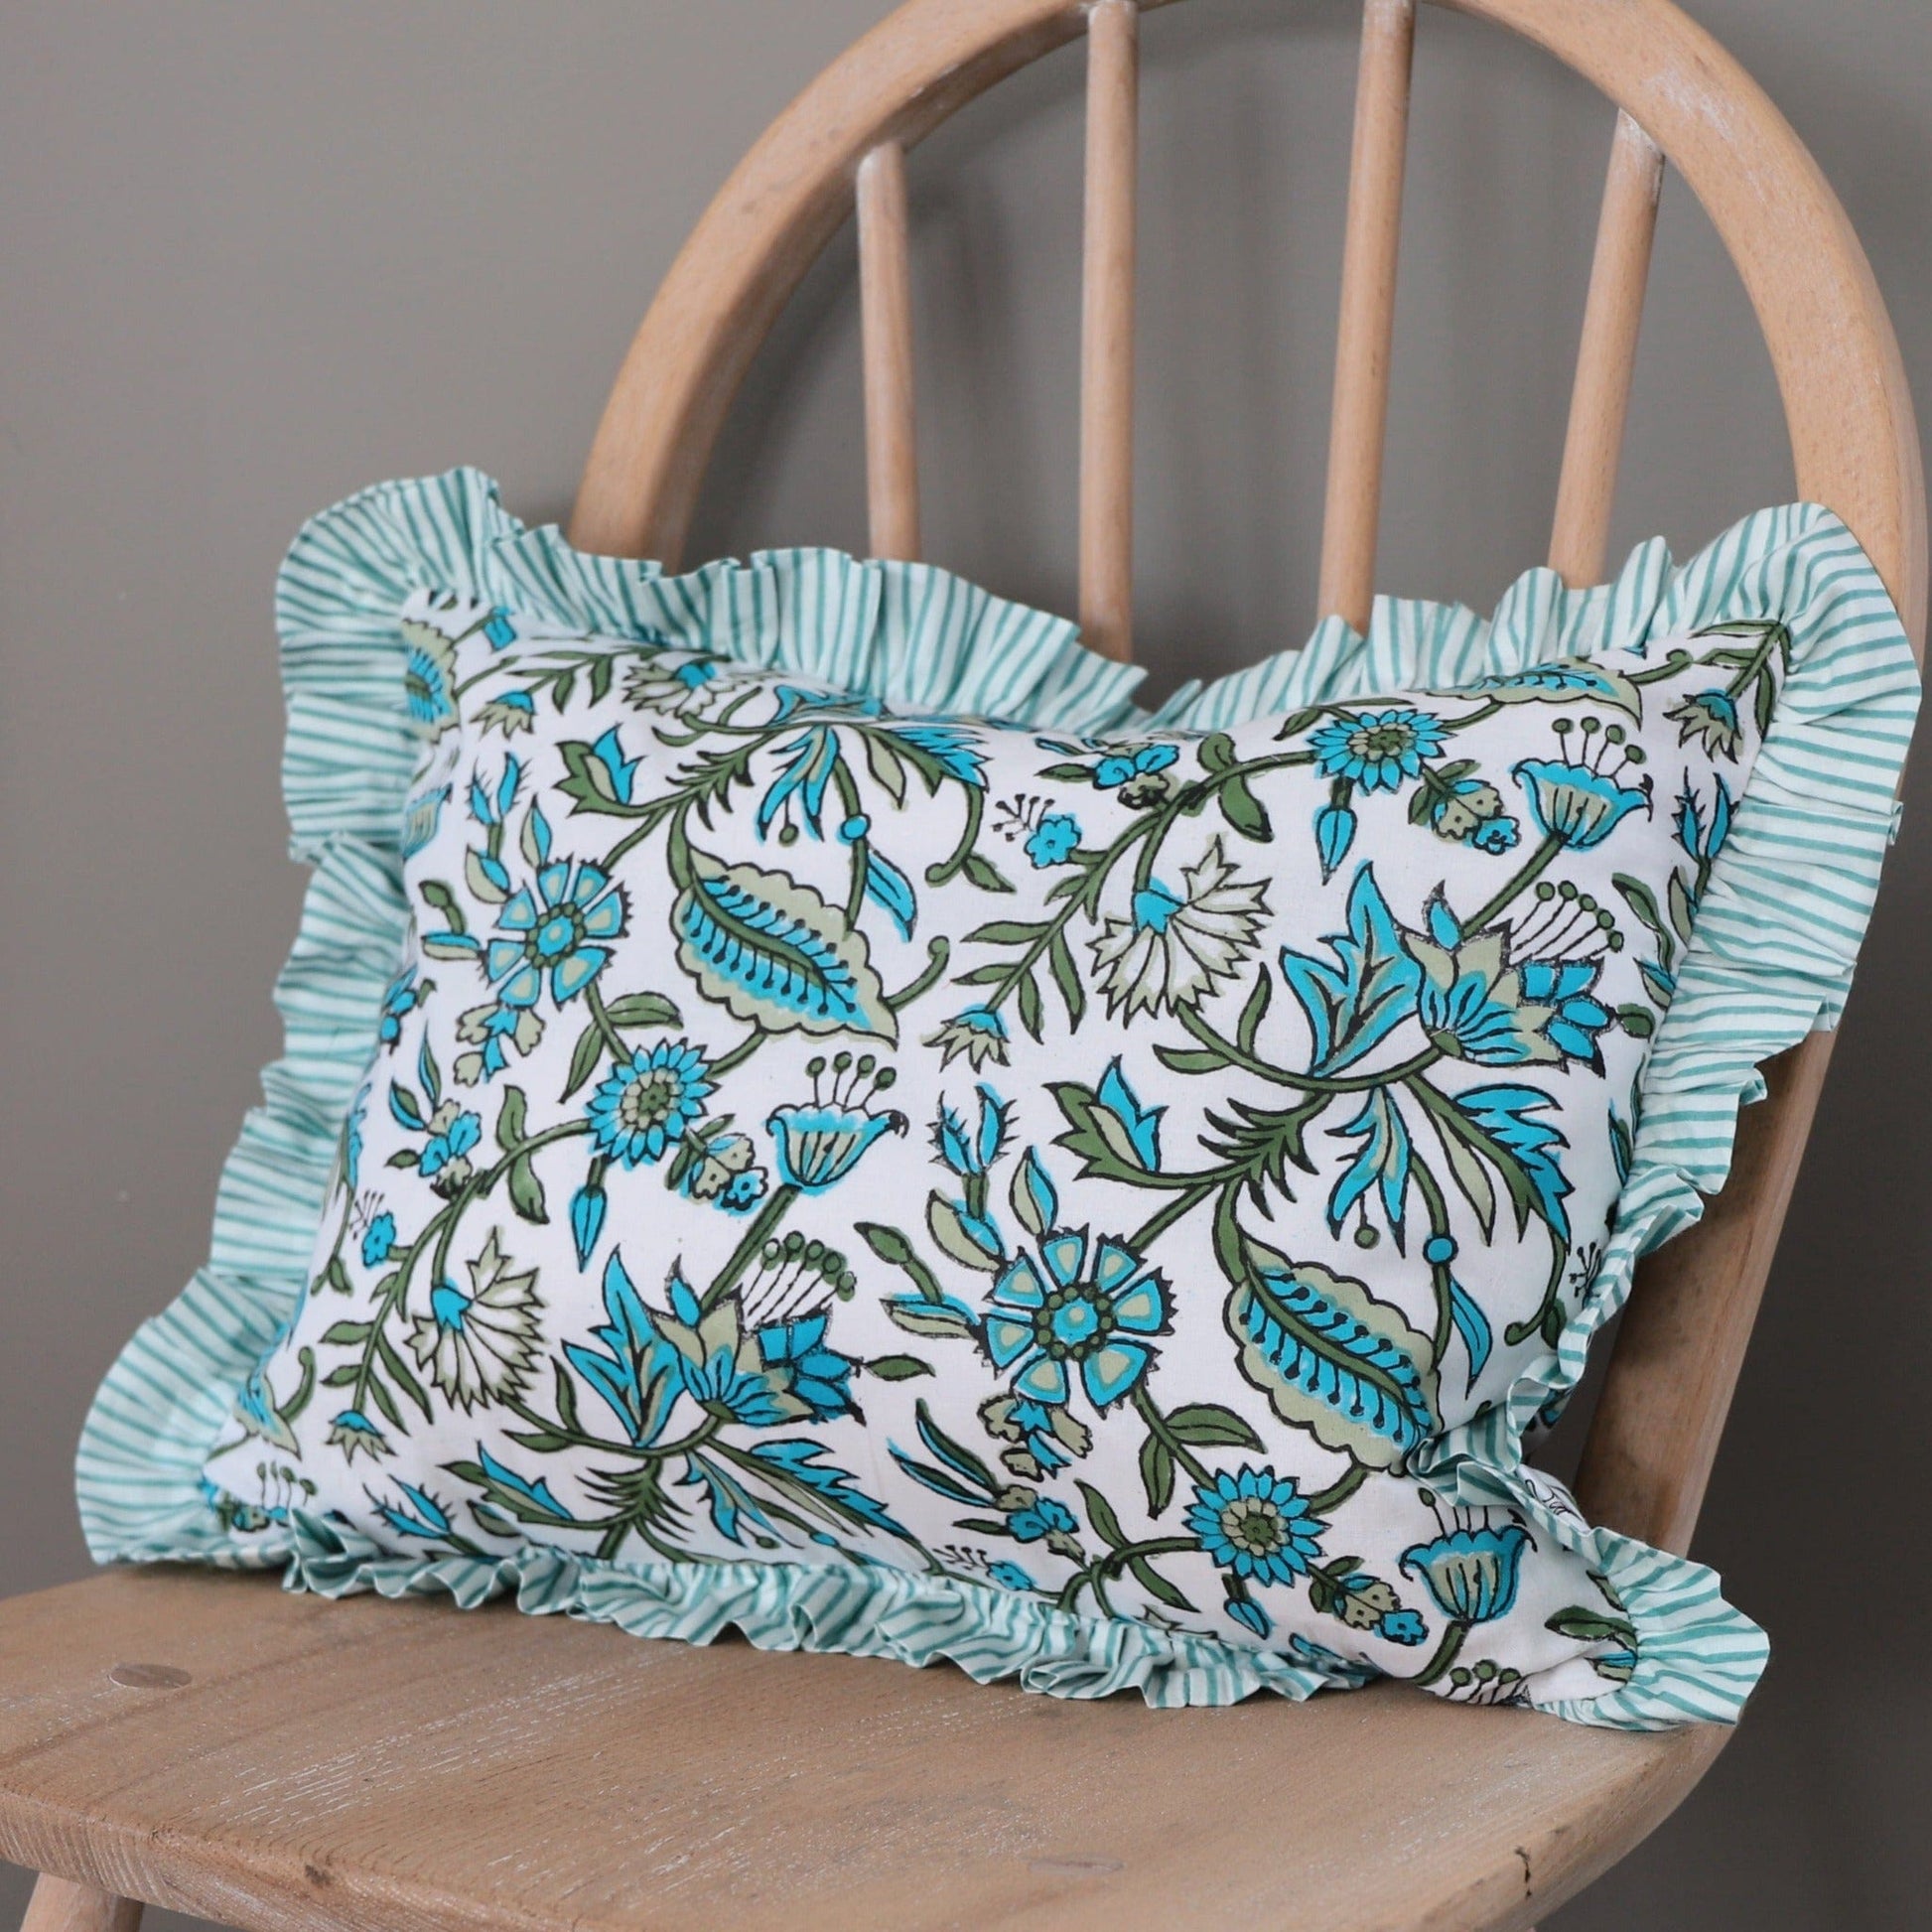 Chippa Arts (Nitin) Cushions Small Ruffle Cushion - Turquoise and Olive Flowers on White 19479